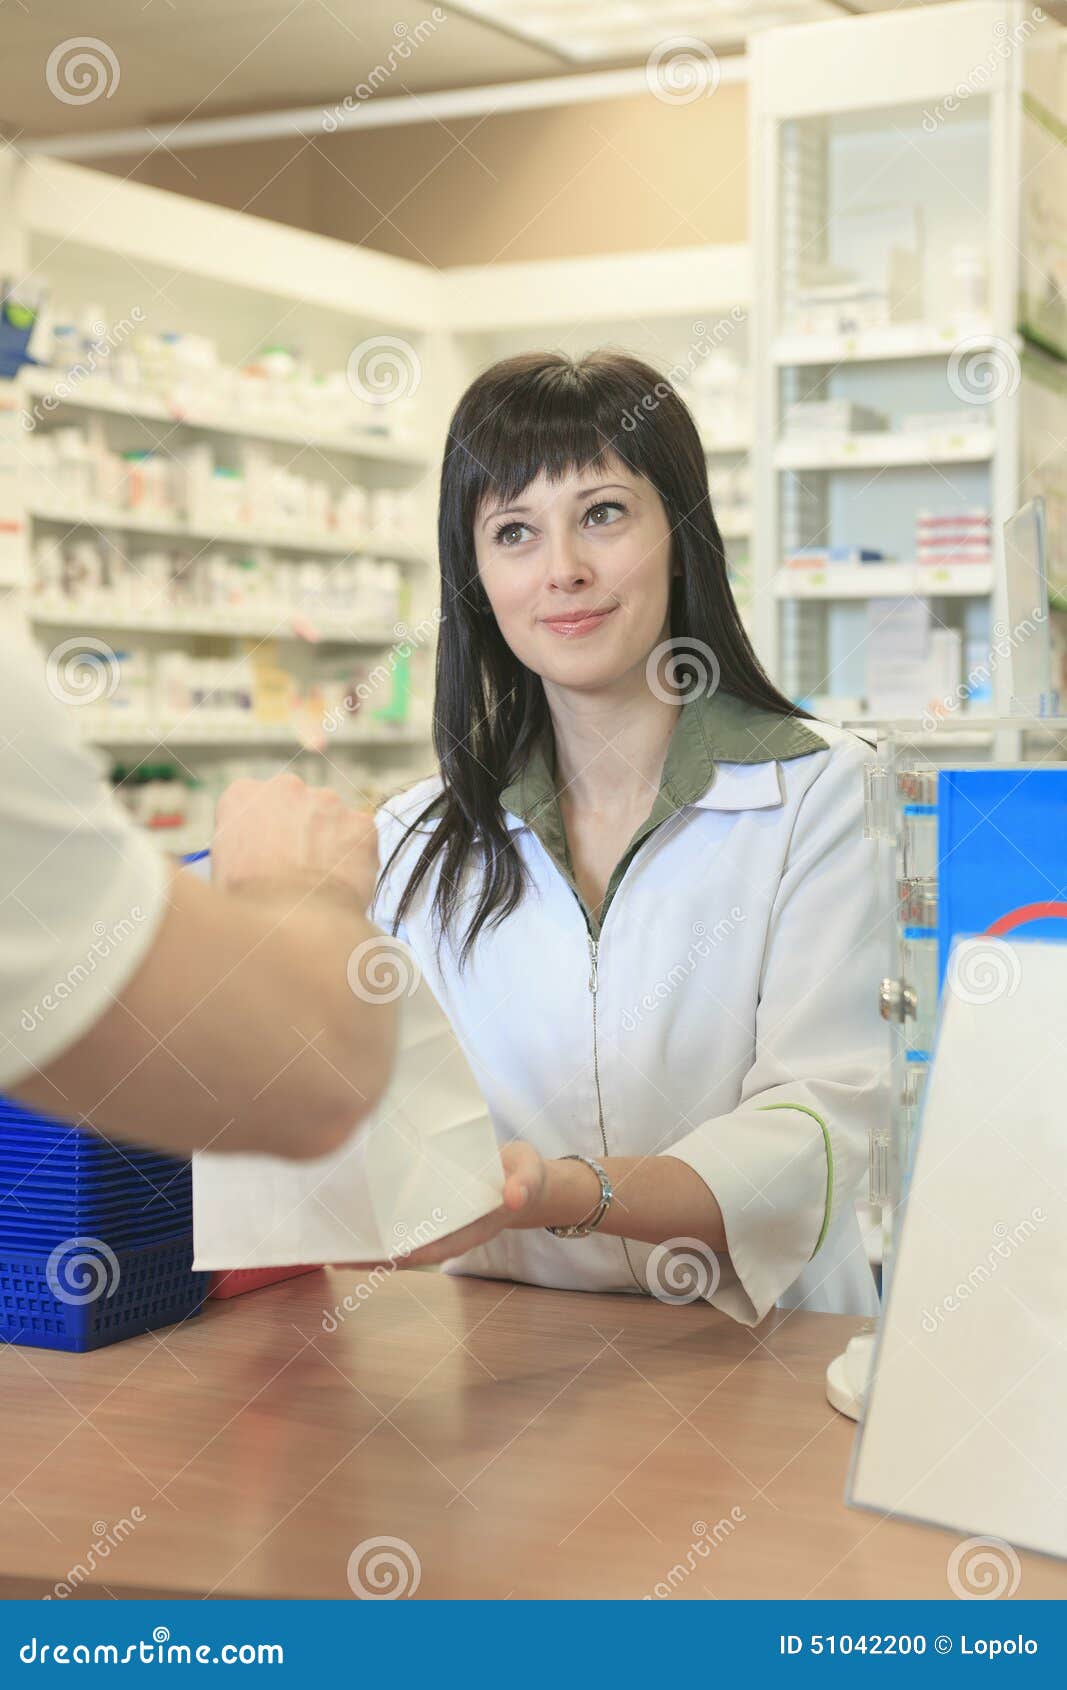 Pharmacist Helping Customer at Counter Place Stock Photo - Image of